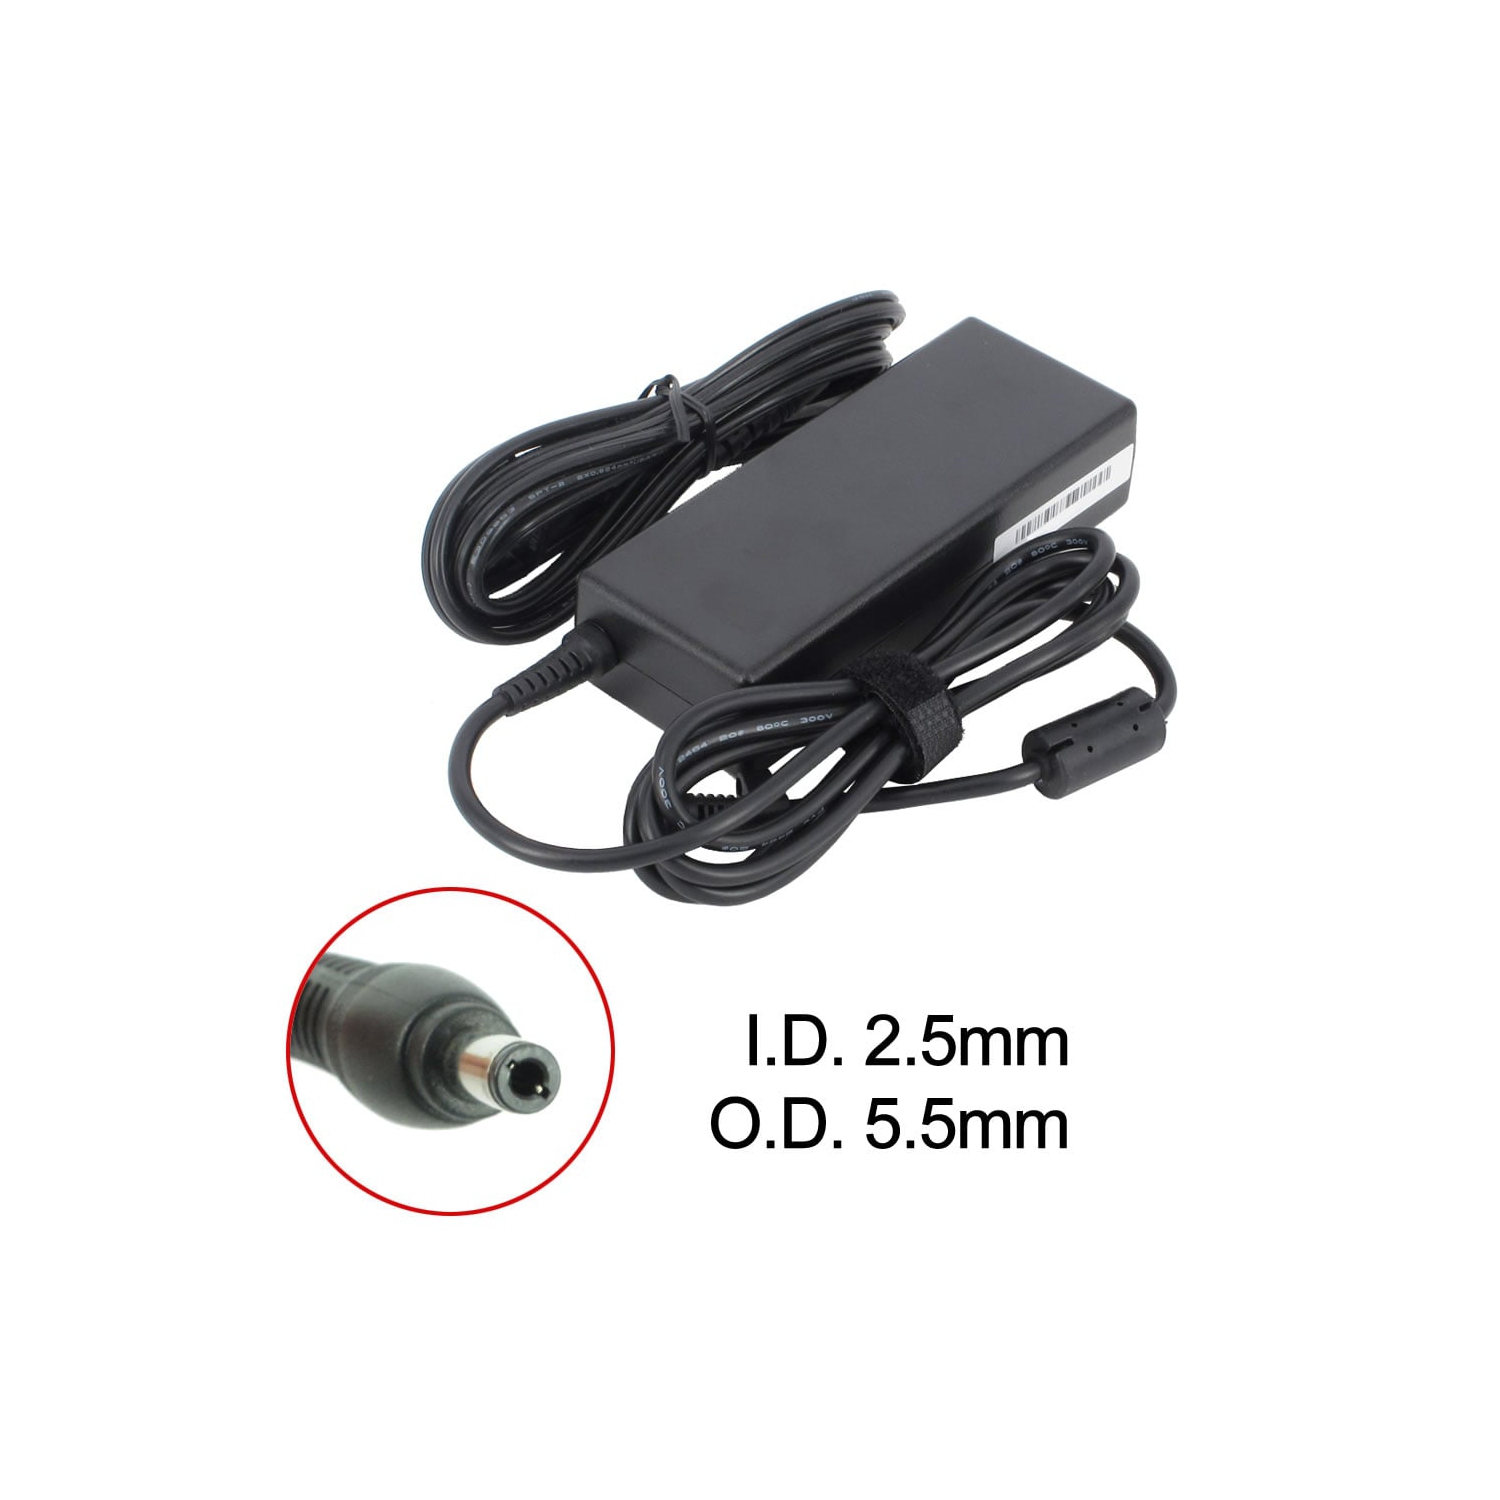 BATTDEPOT New Laptop AC Adapter for NEC LL550/5D 103942 808-875692-010A 9T458 ADP-65 HB BBEF PA-1900-36 SA80-3115